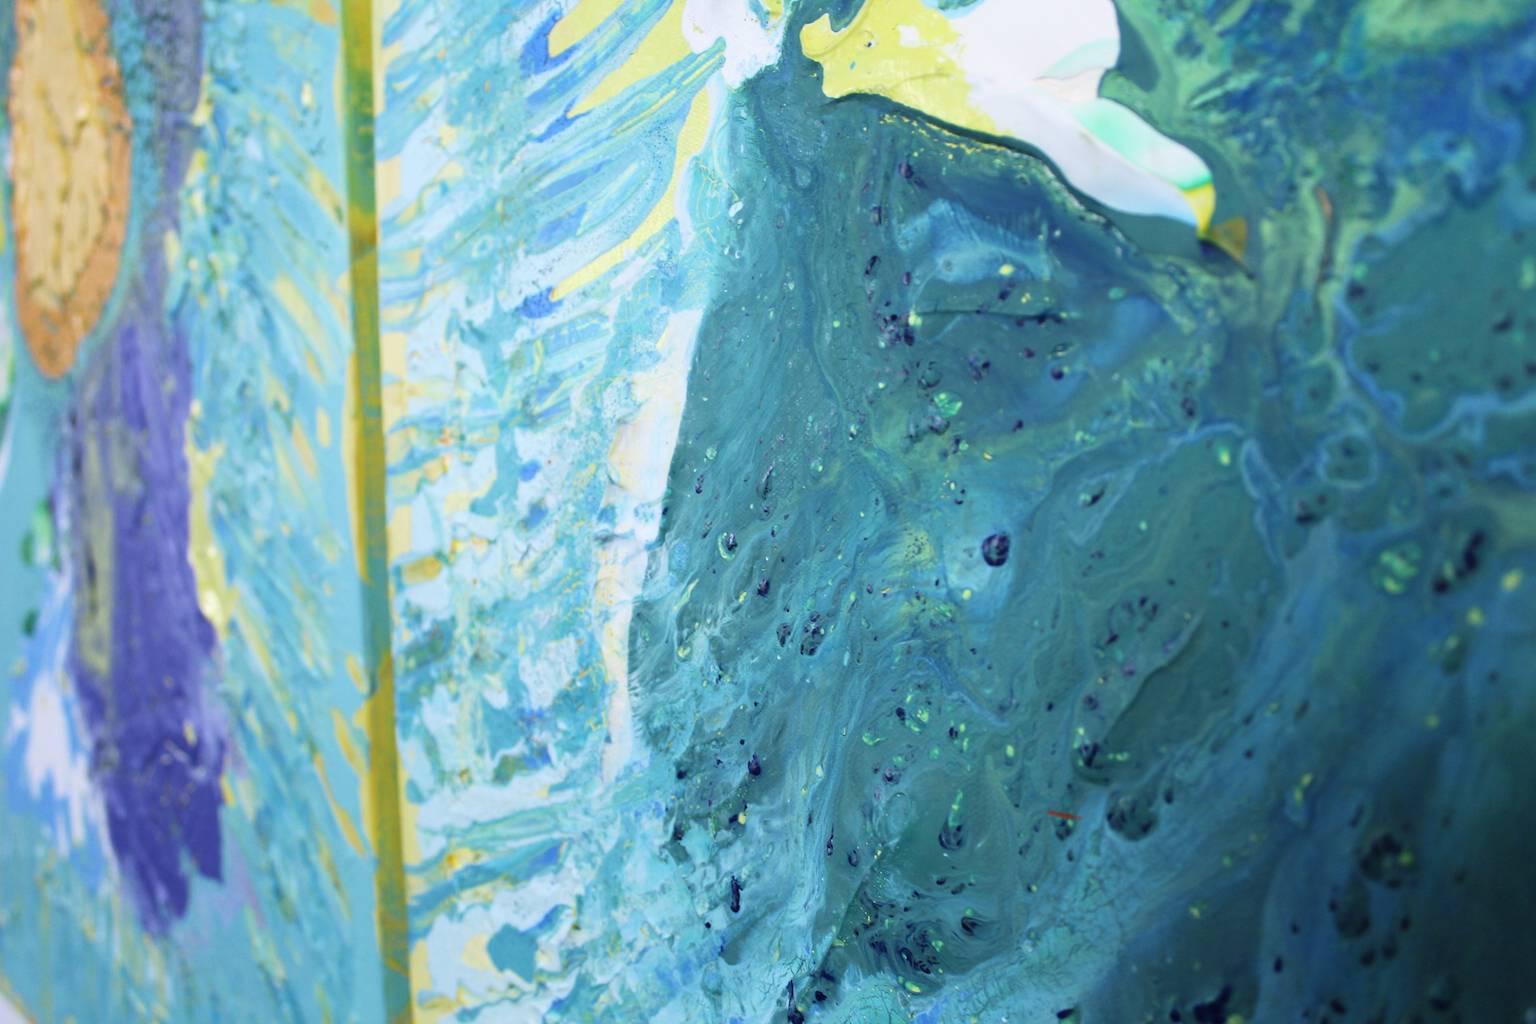 #63 Triptych, three paintings, Dutch contemporary, green, yellow, purple - Blue Abstract Painting by Harry van Gestel